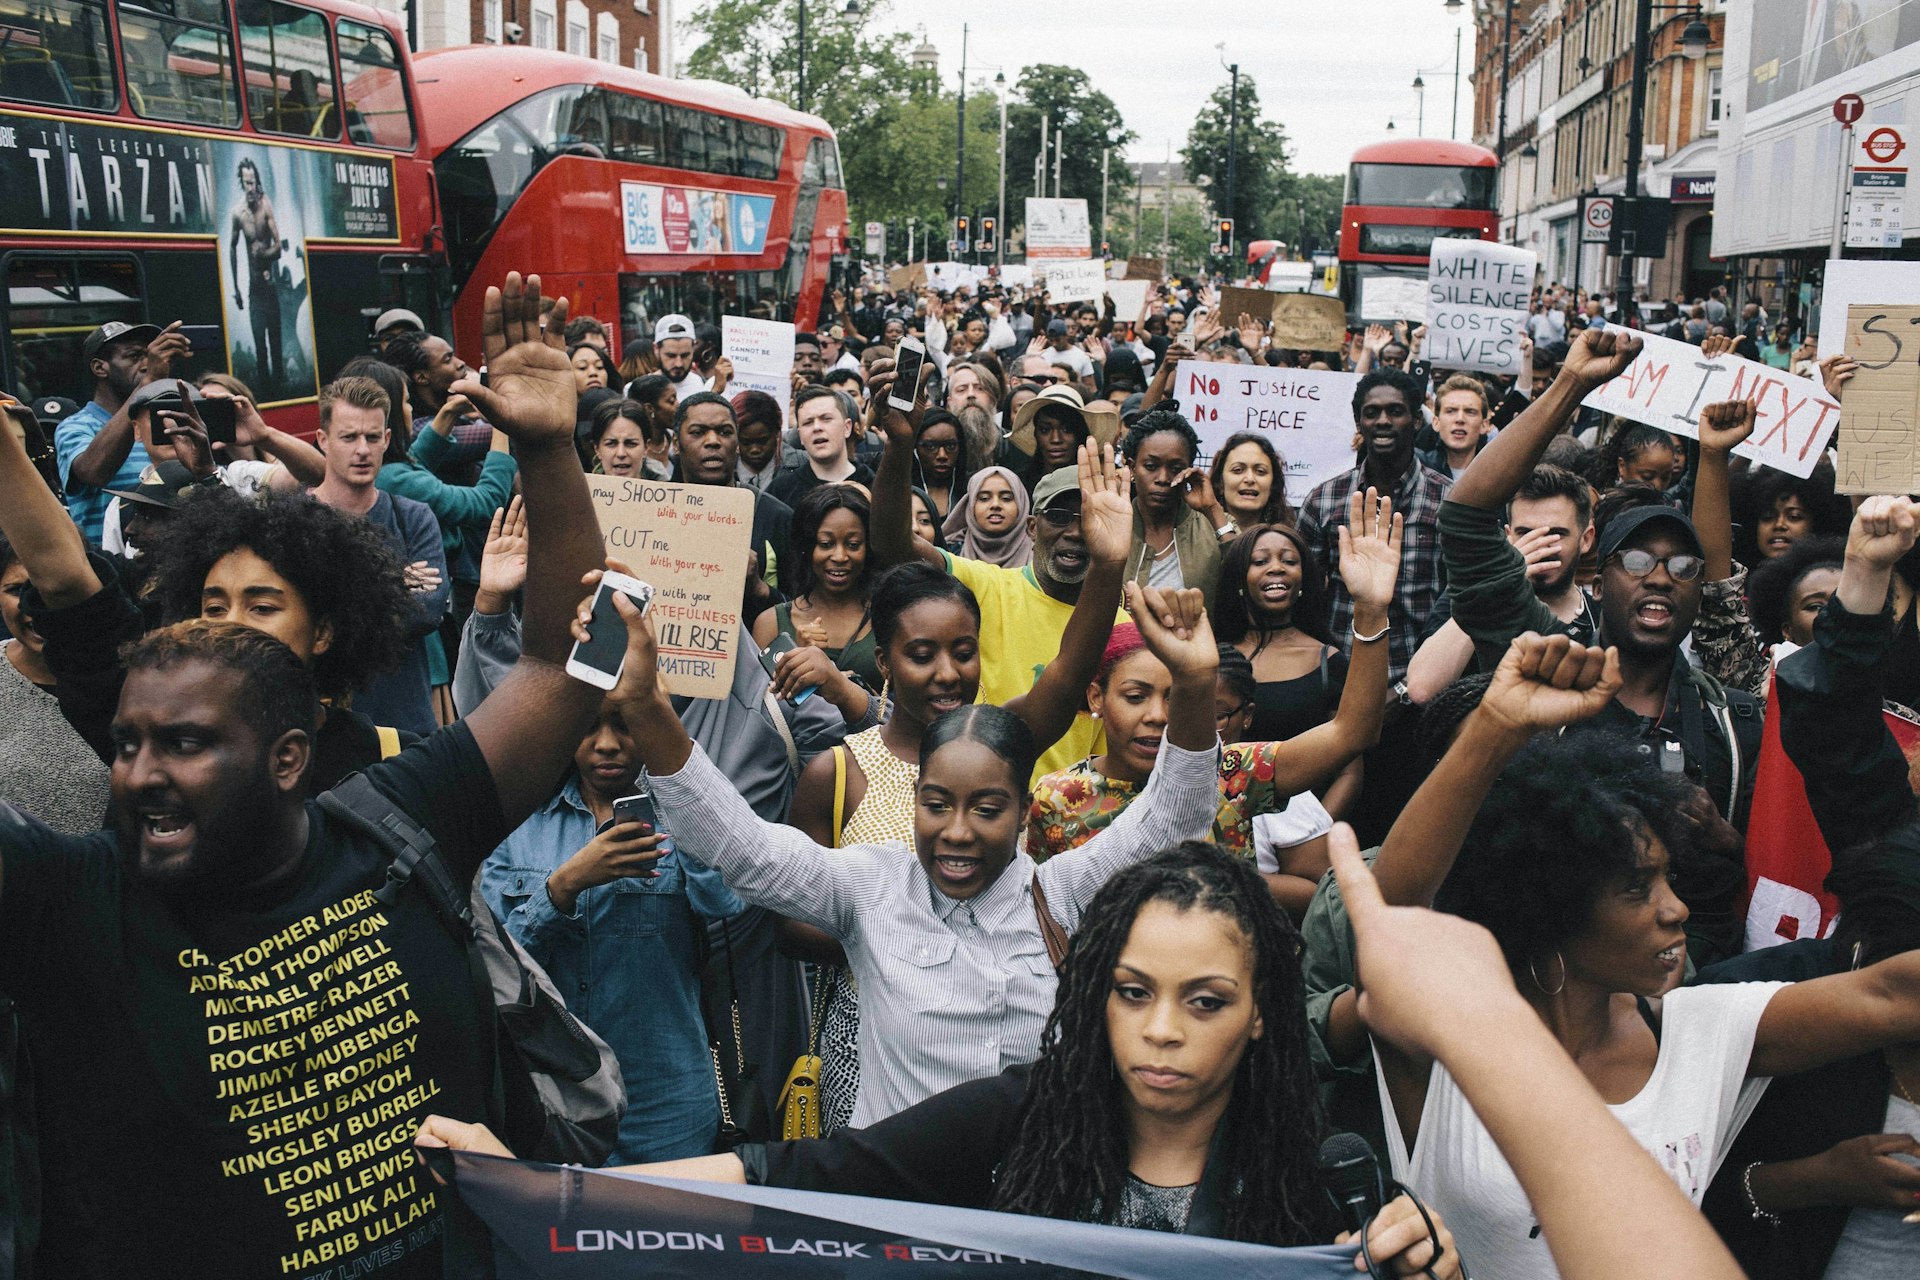 From Louisiana to London: Black Lives Matter protests are growing